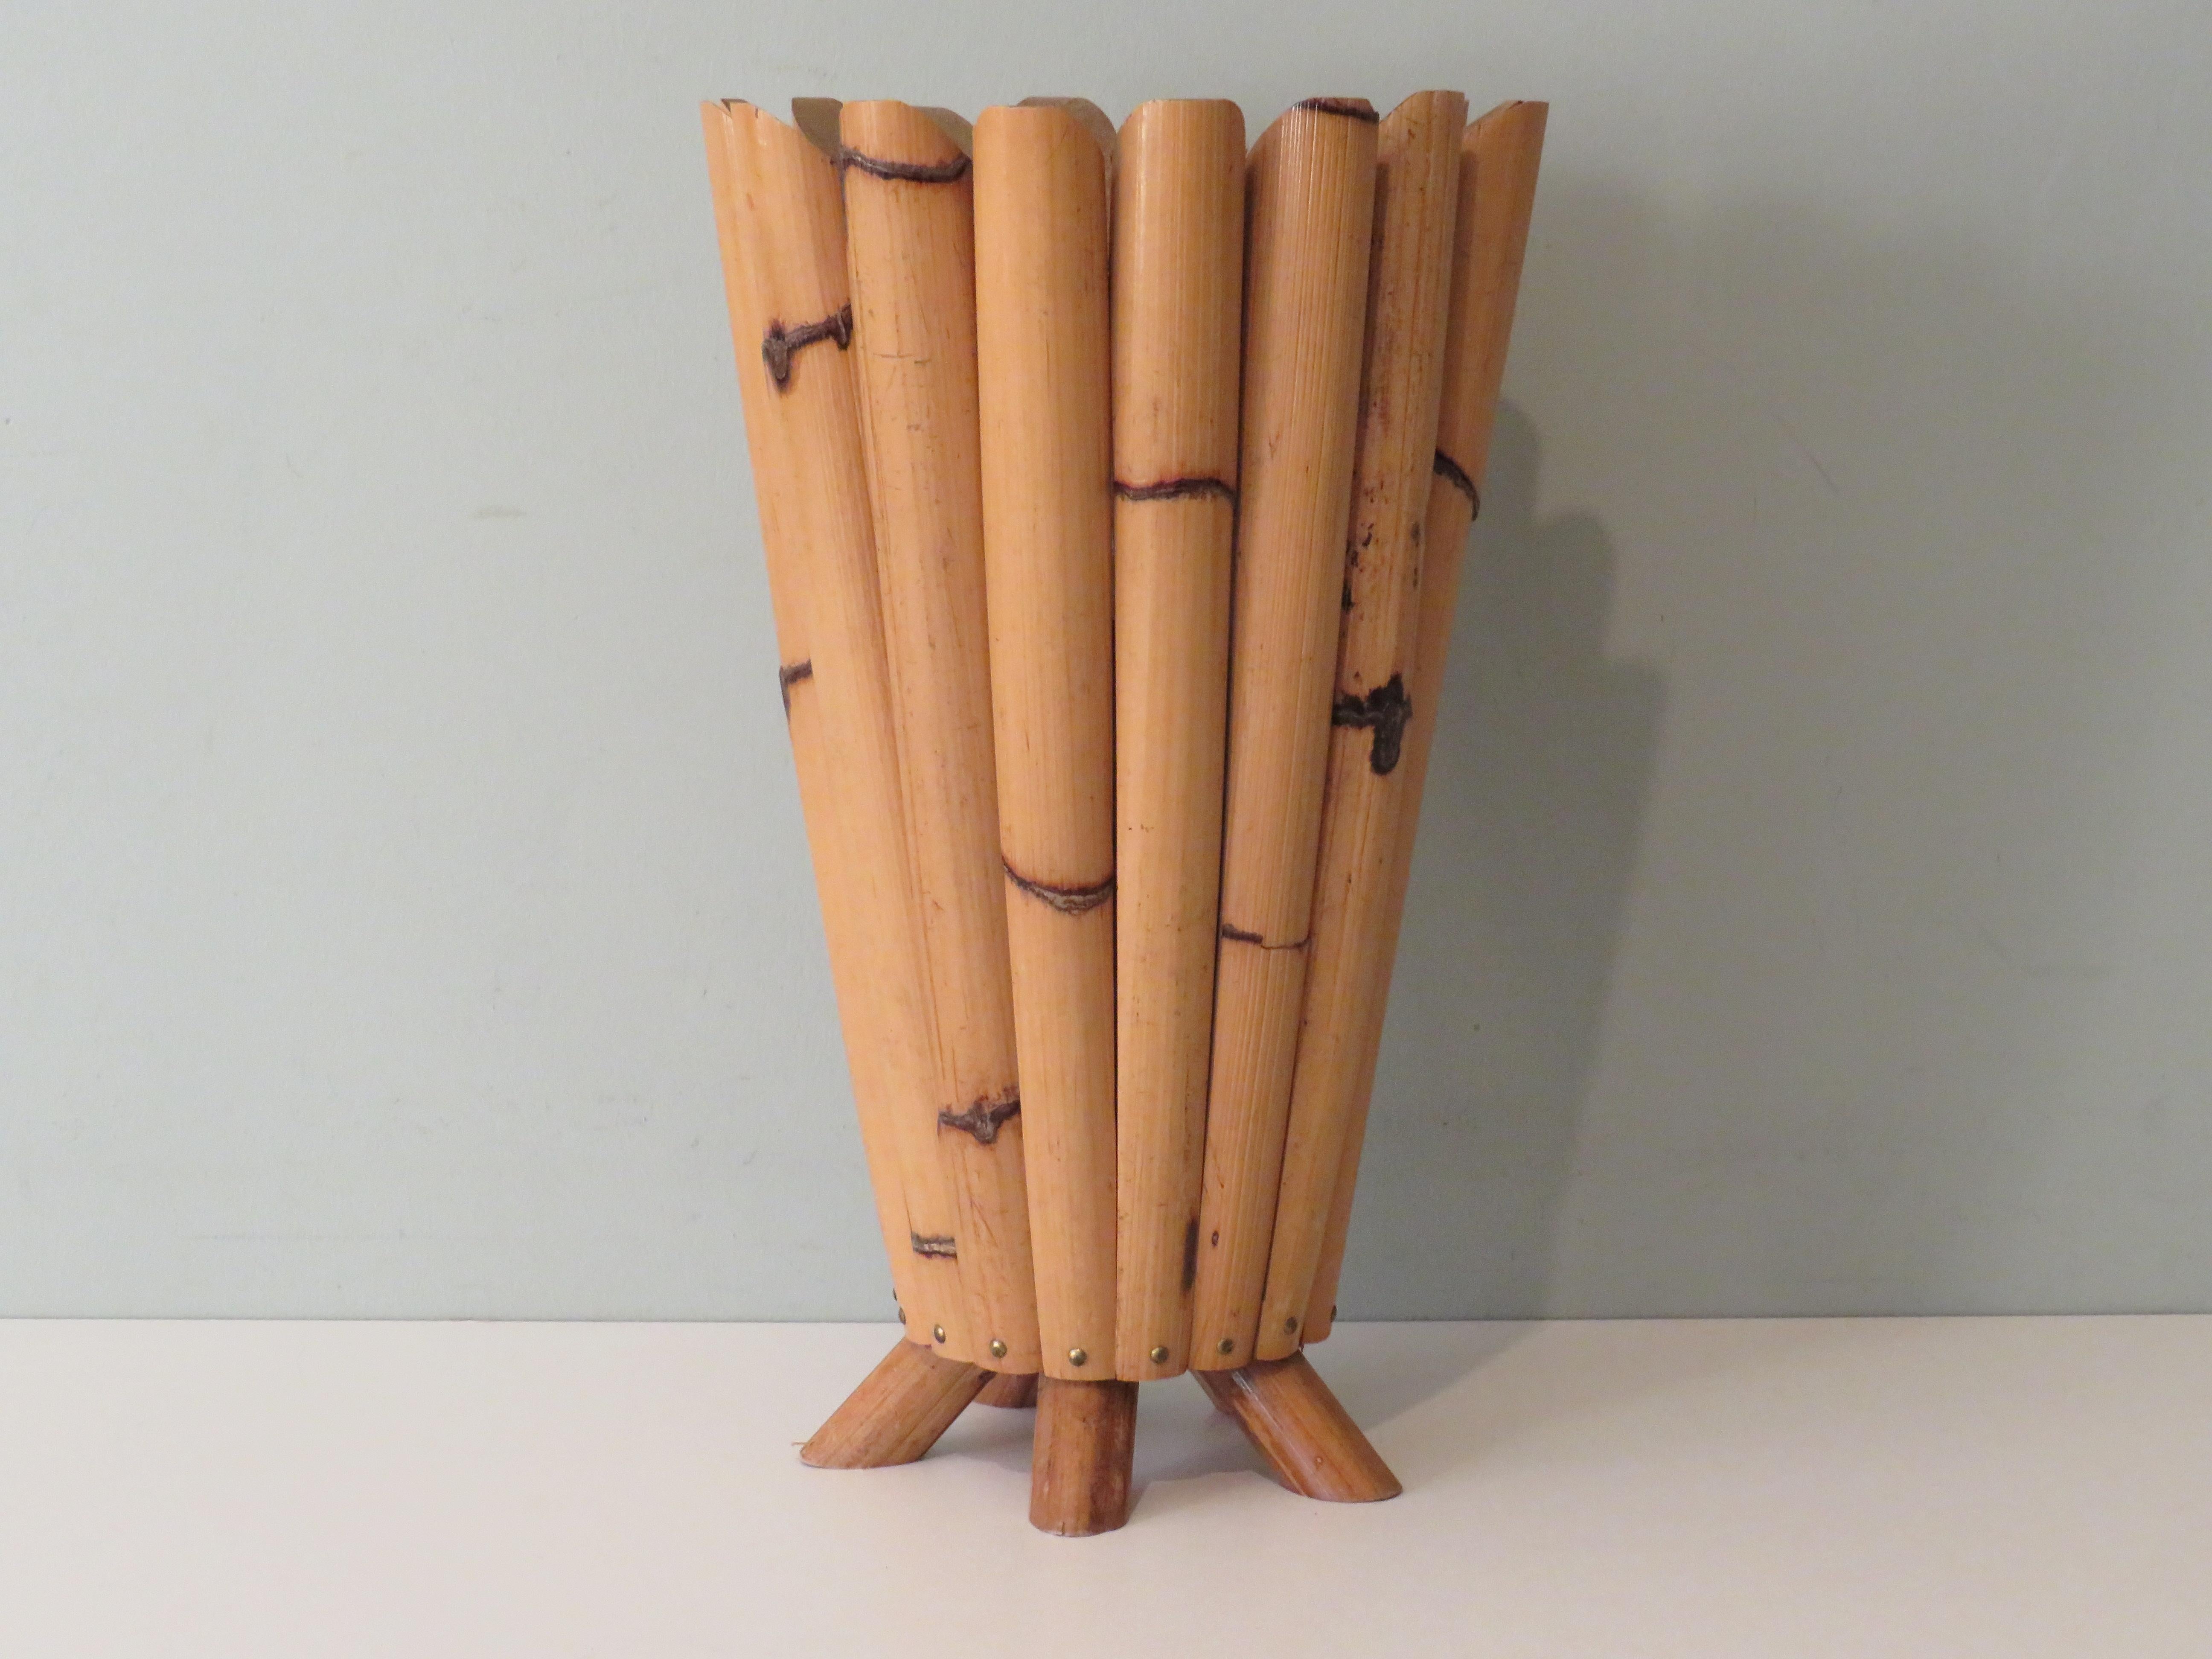 Umbrella stand on 5 legs, completely made of bamboo and equipped with the original, galvanized inner box.
The umbrella stand has a height of 41.5 cm.
The diameter at the top is 18.5 cm on the inside and 25.5 cm on the outside.